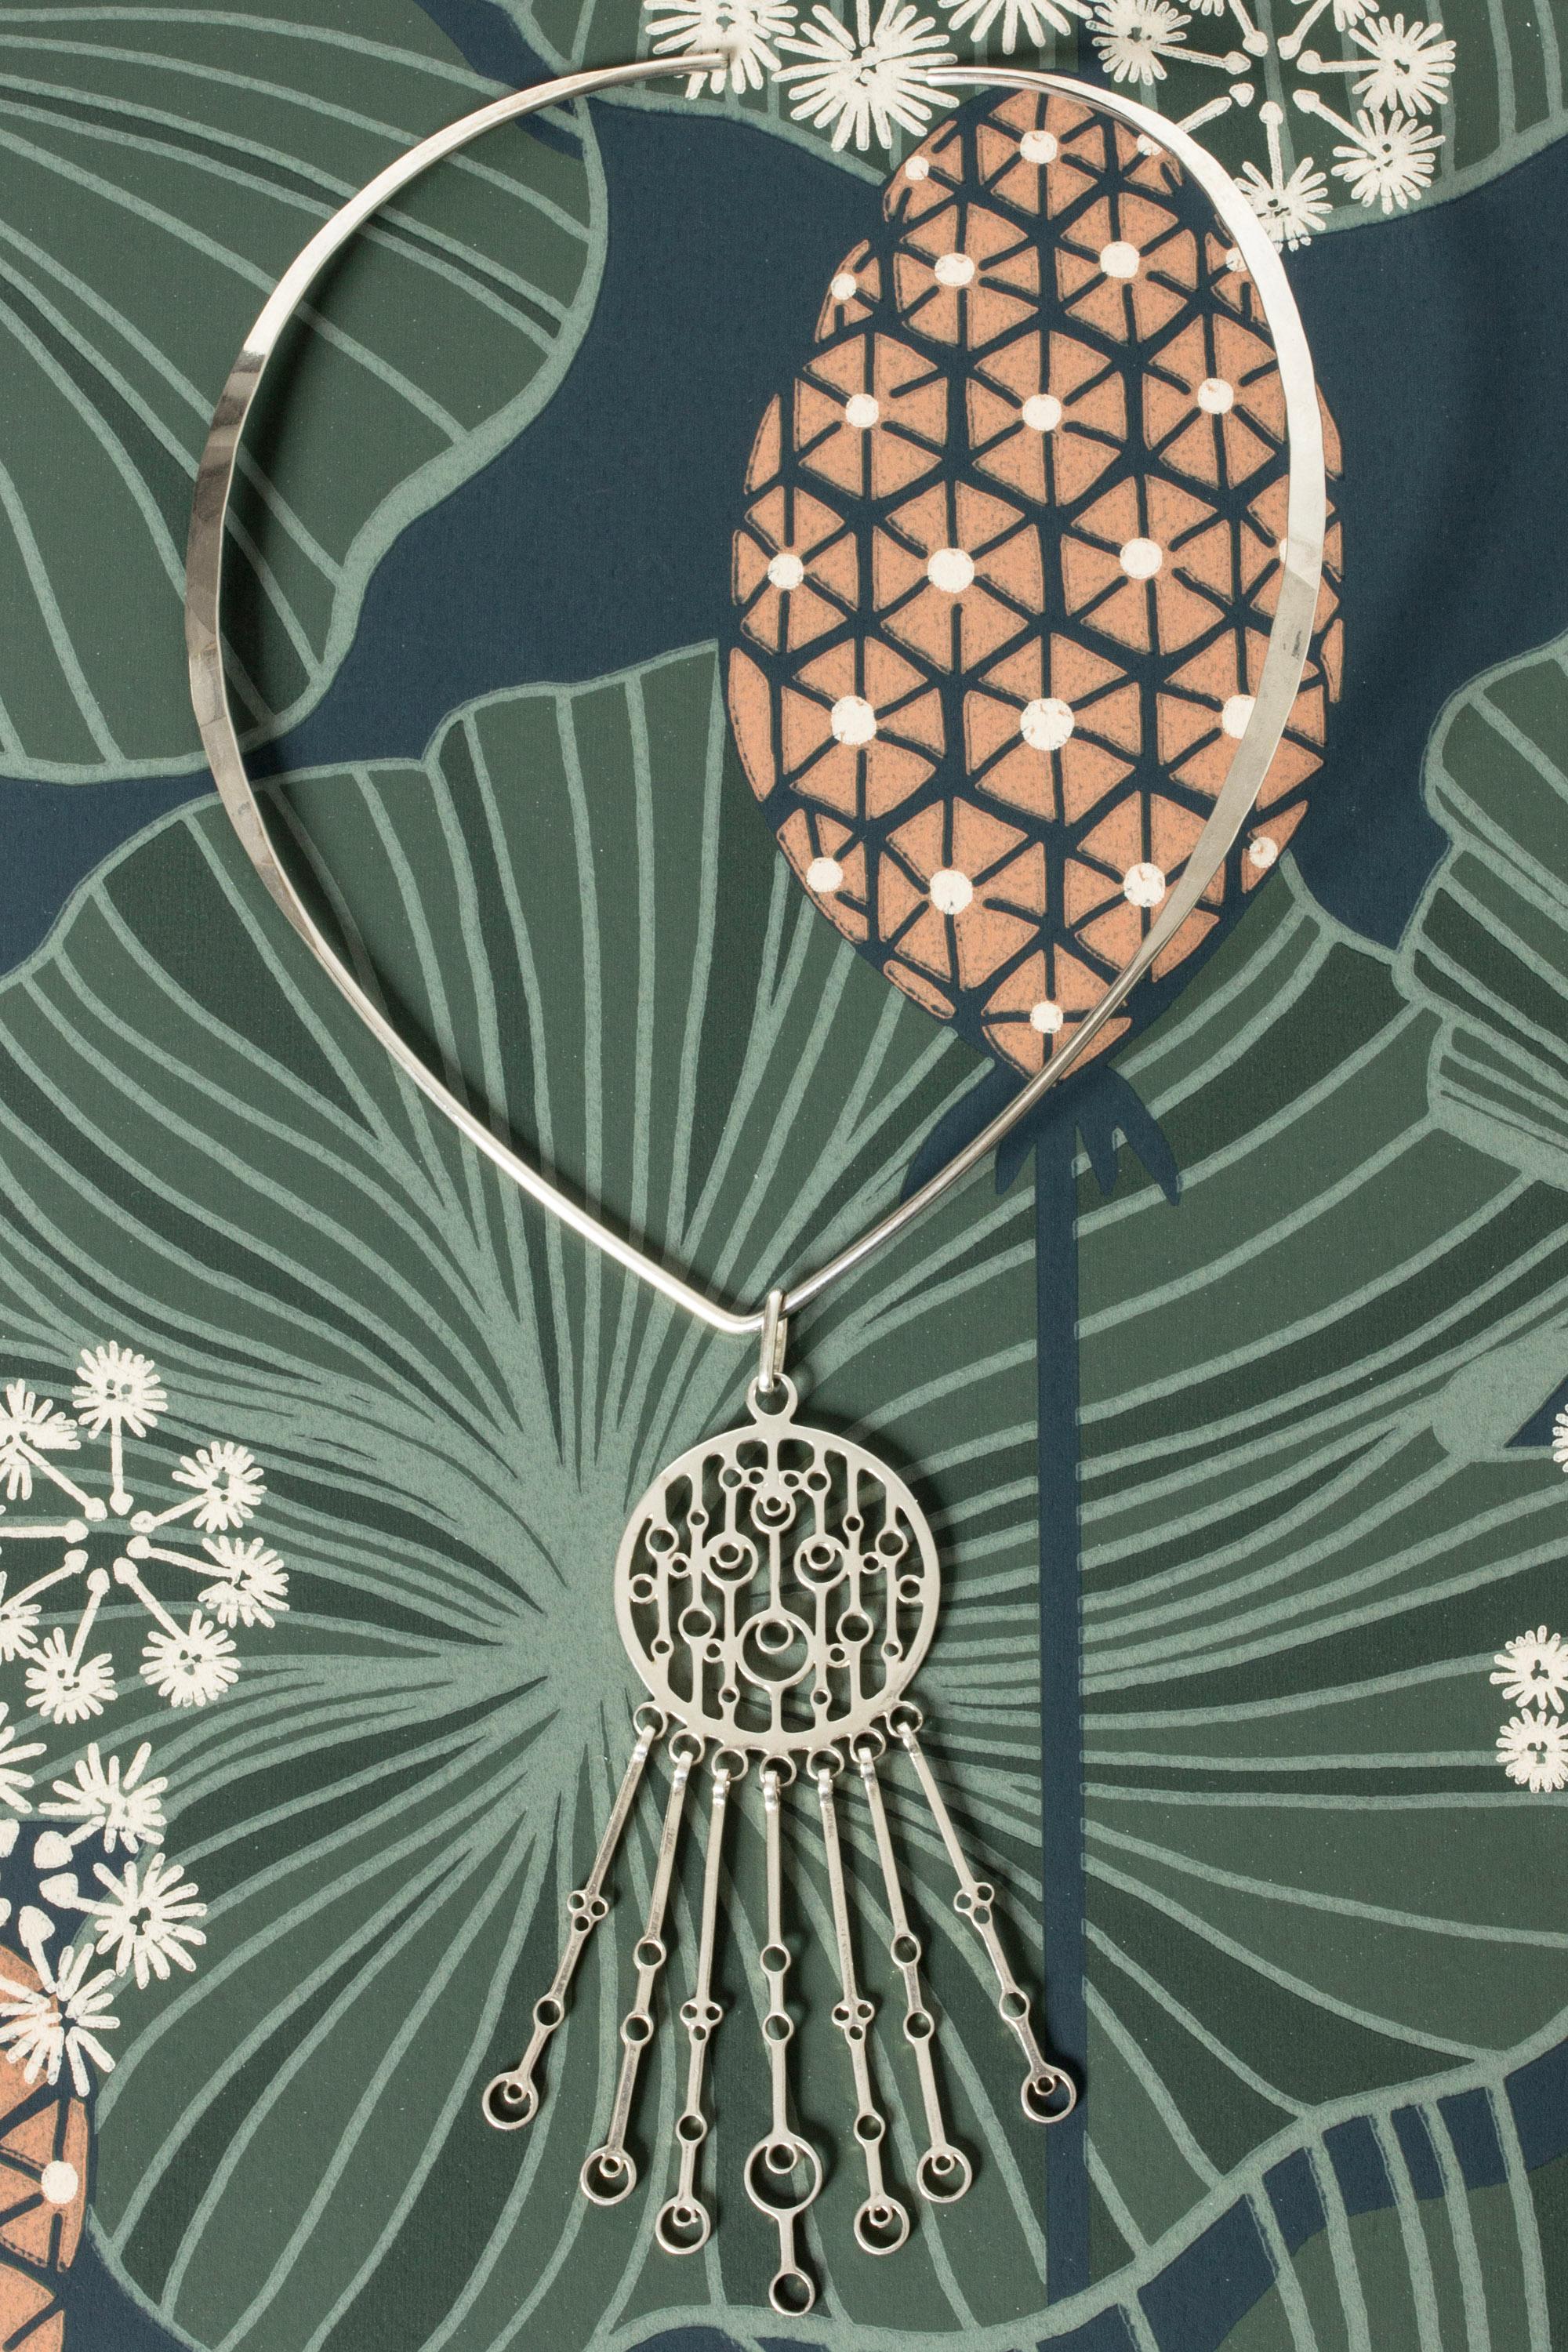 Beautiful silver neckring by Marianne Berg, with a large kinetic pendant in a folkloristic design. Looks great with a plunging neckline or with a open shirt.